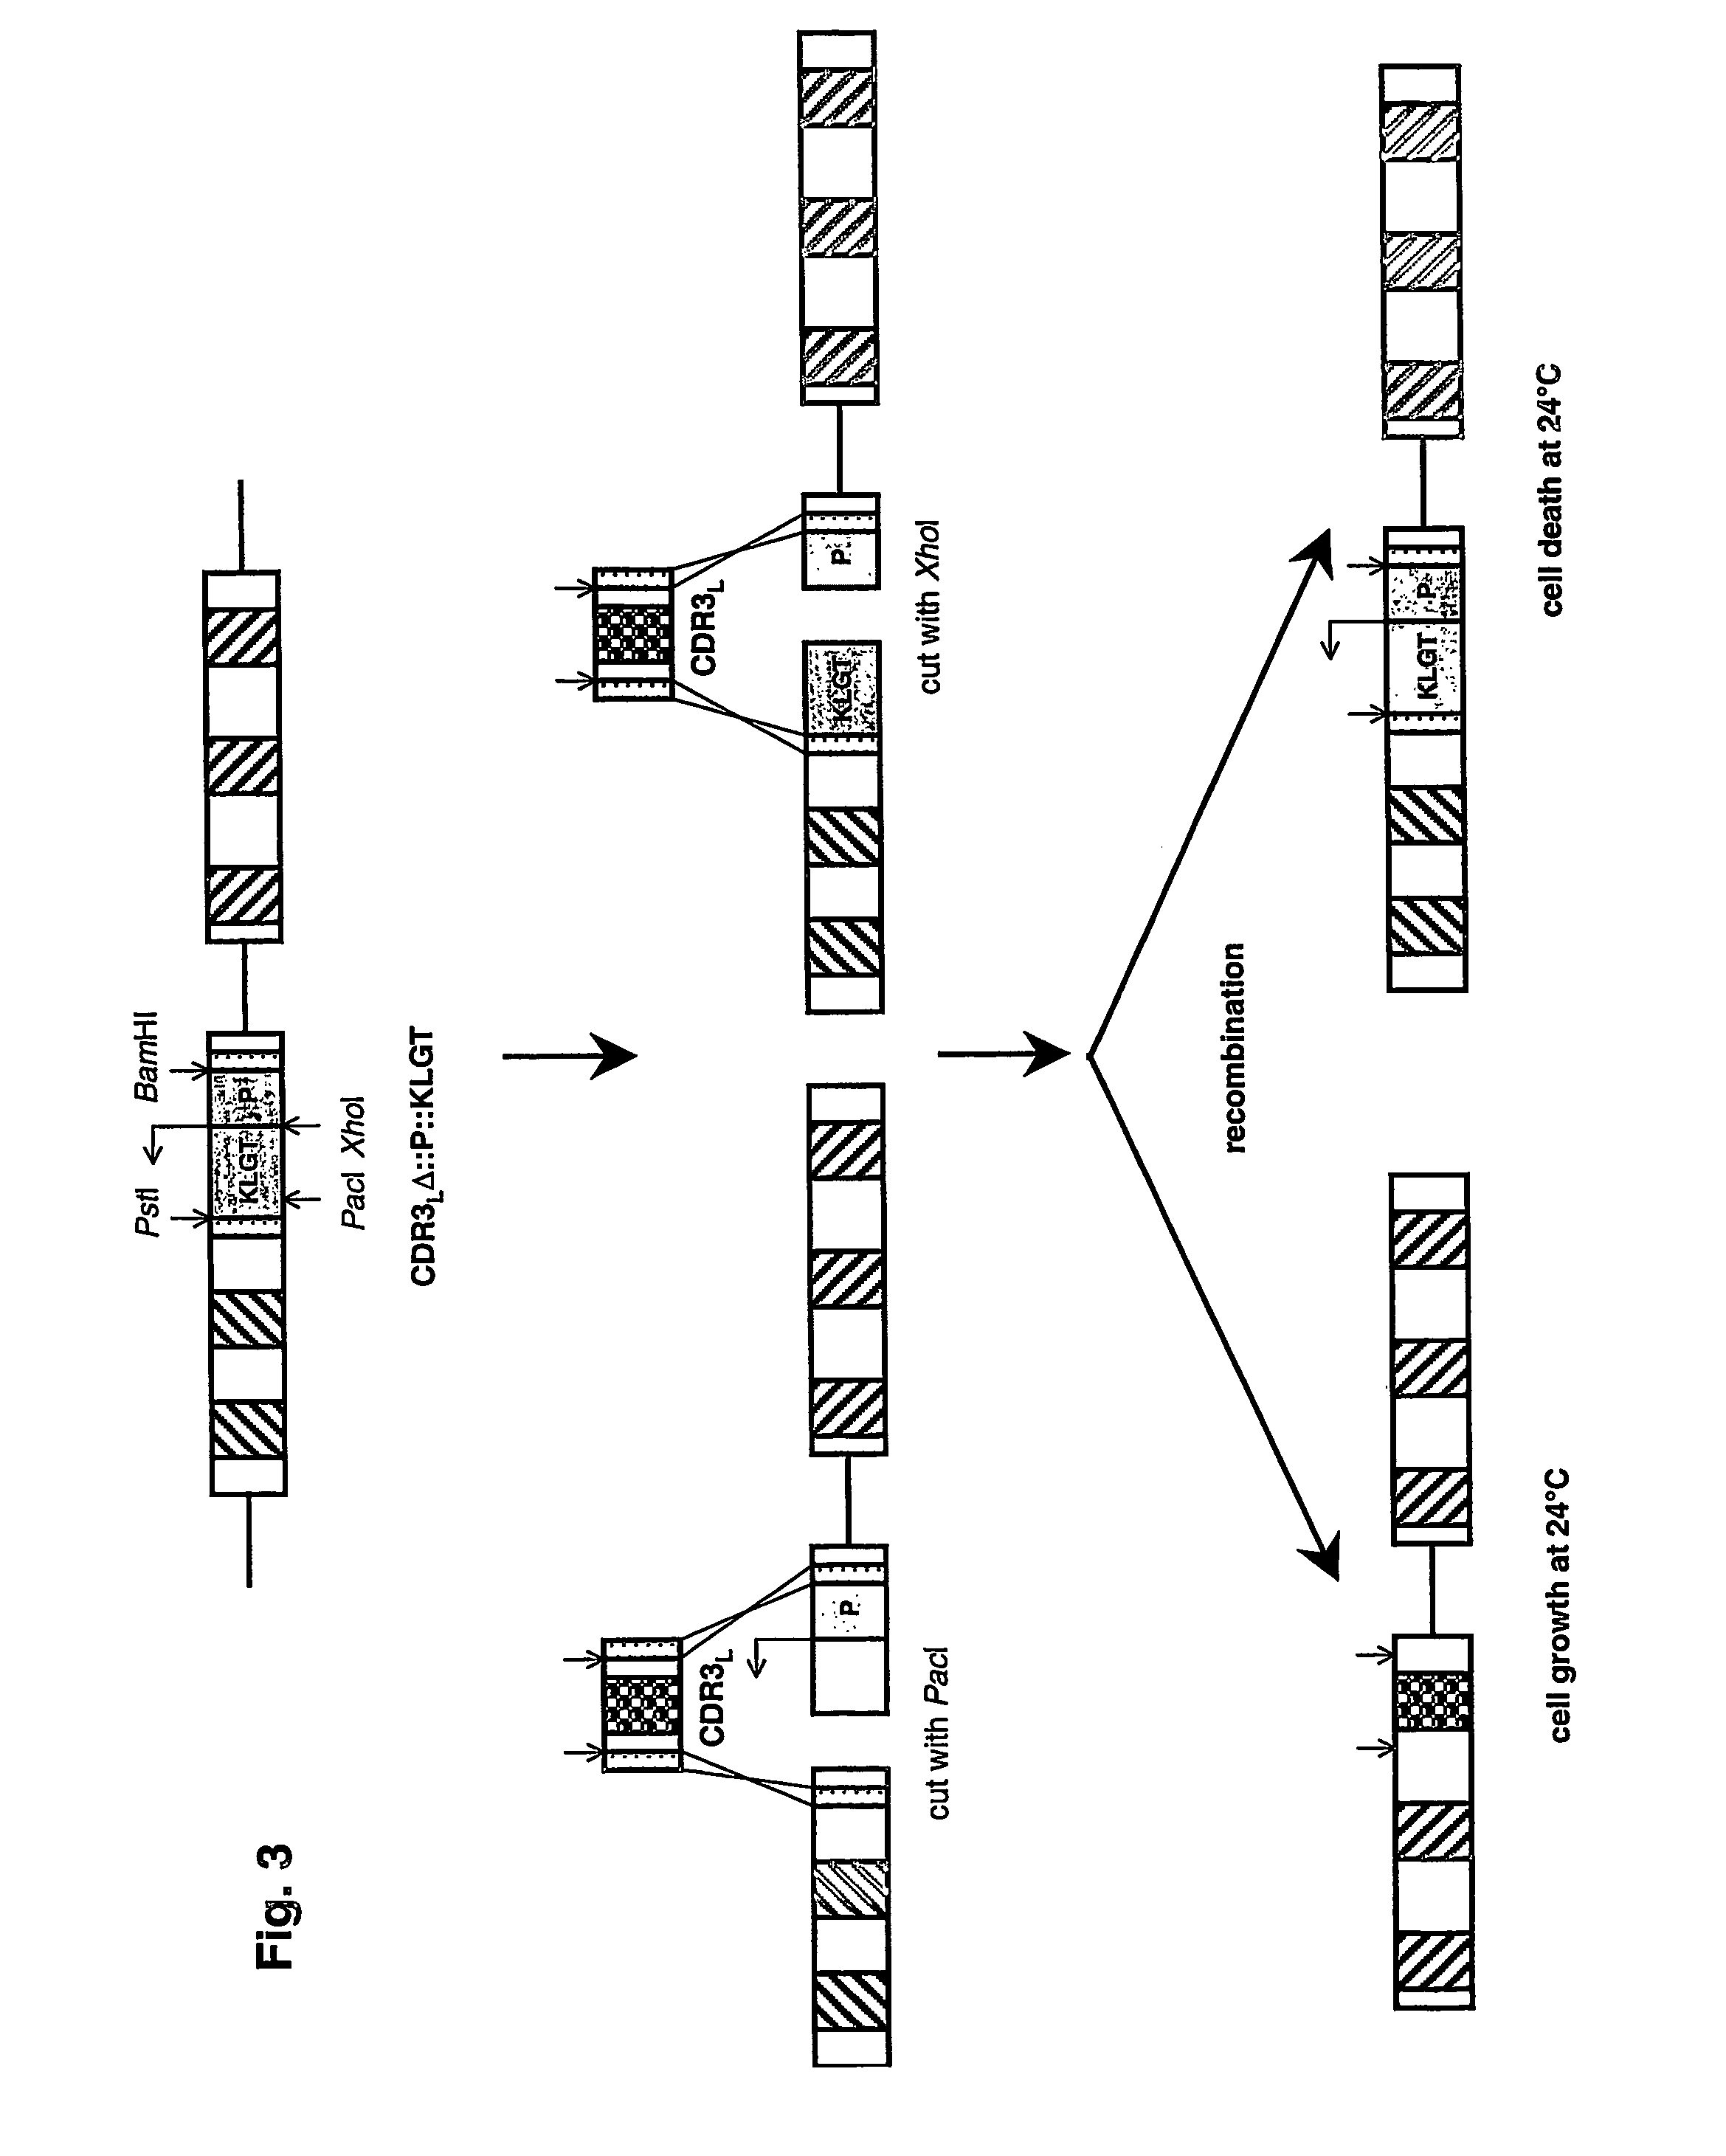 Method for the construction of randomized gene sequence libraries in cells